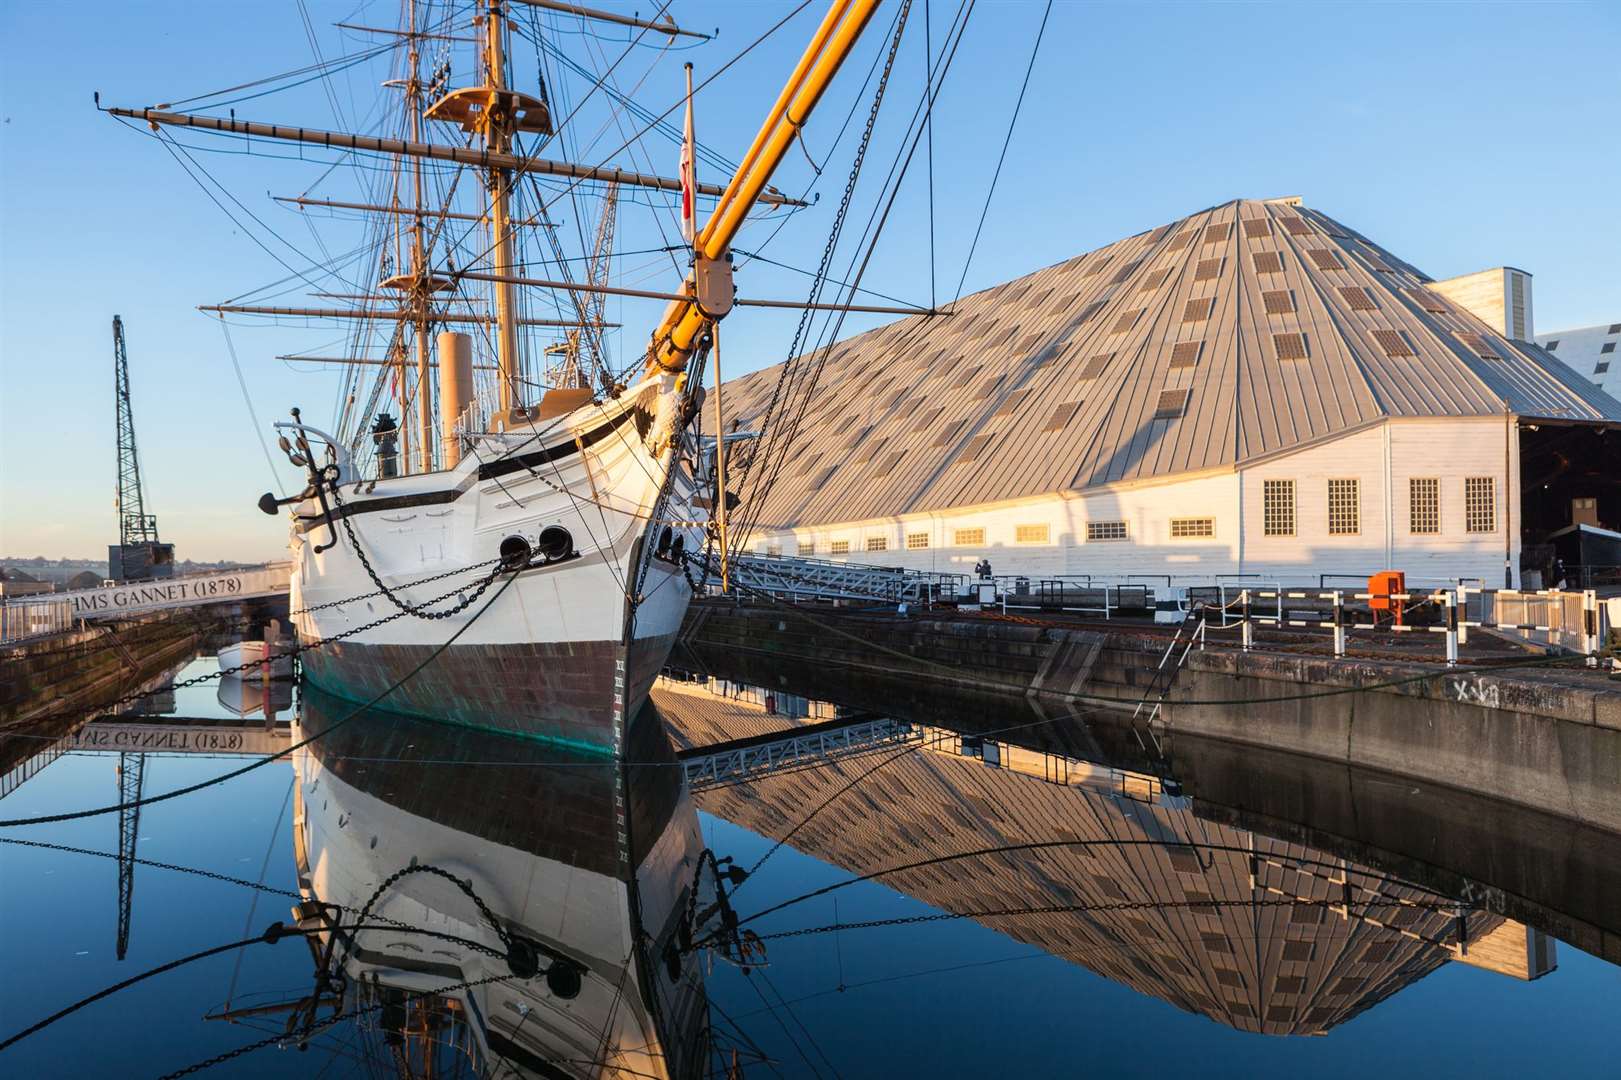 Chatham Historic Dockyard will reopen to visitors